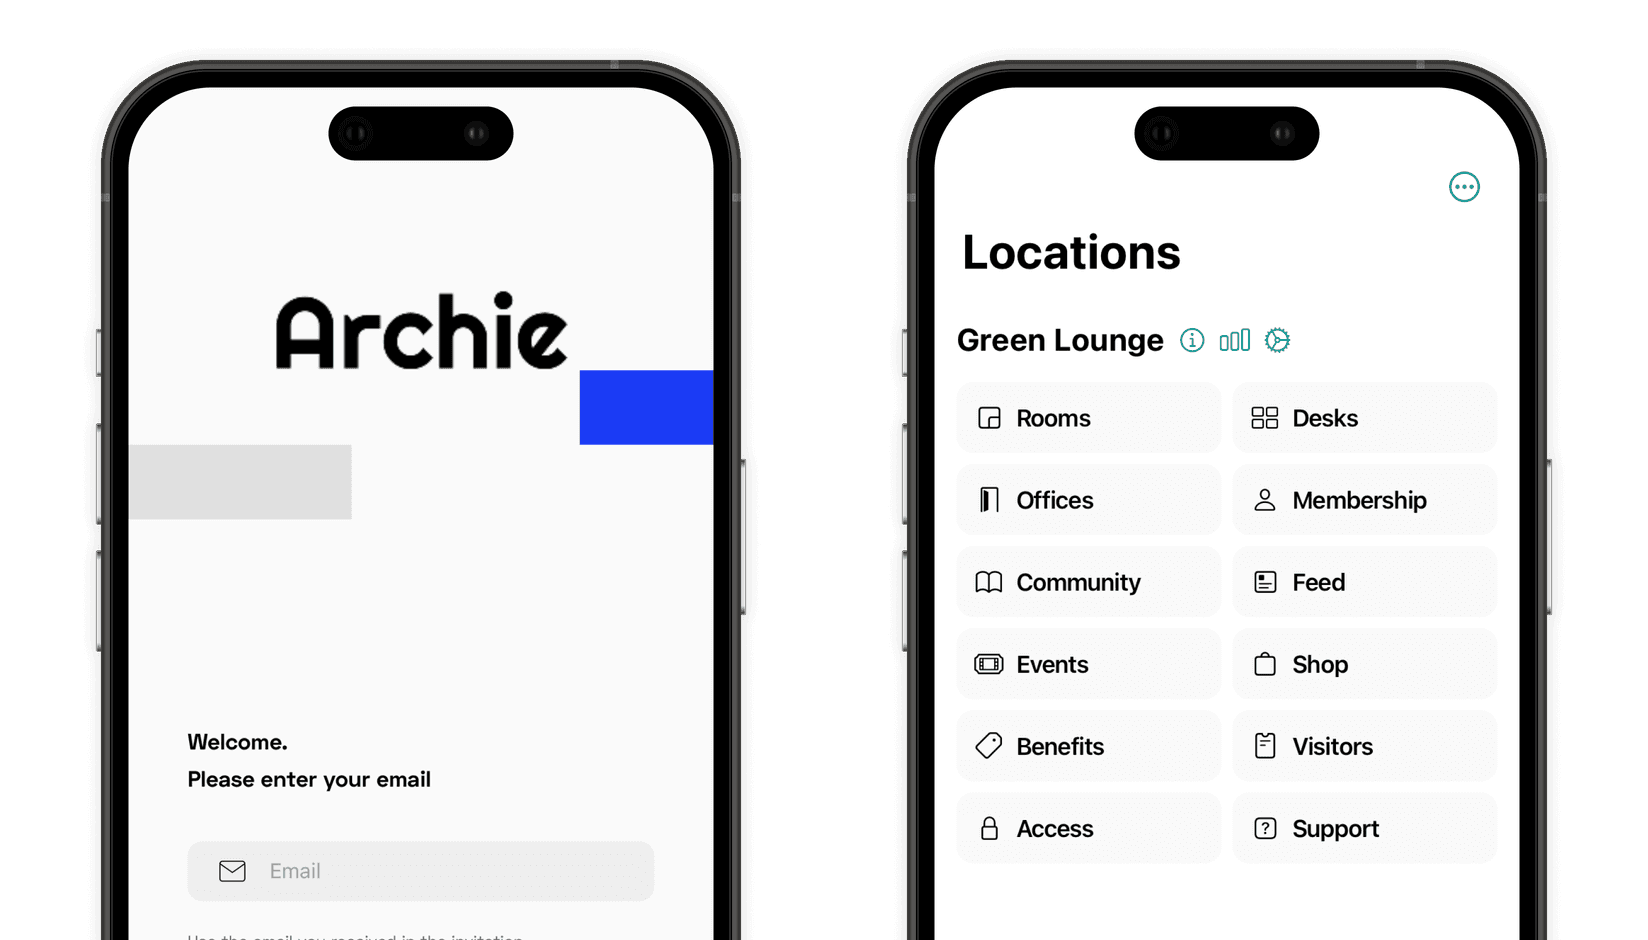 Spacebring coworking space management software vs Archie app - what's better for your business